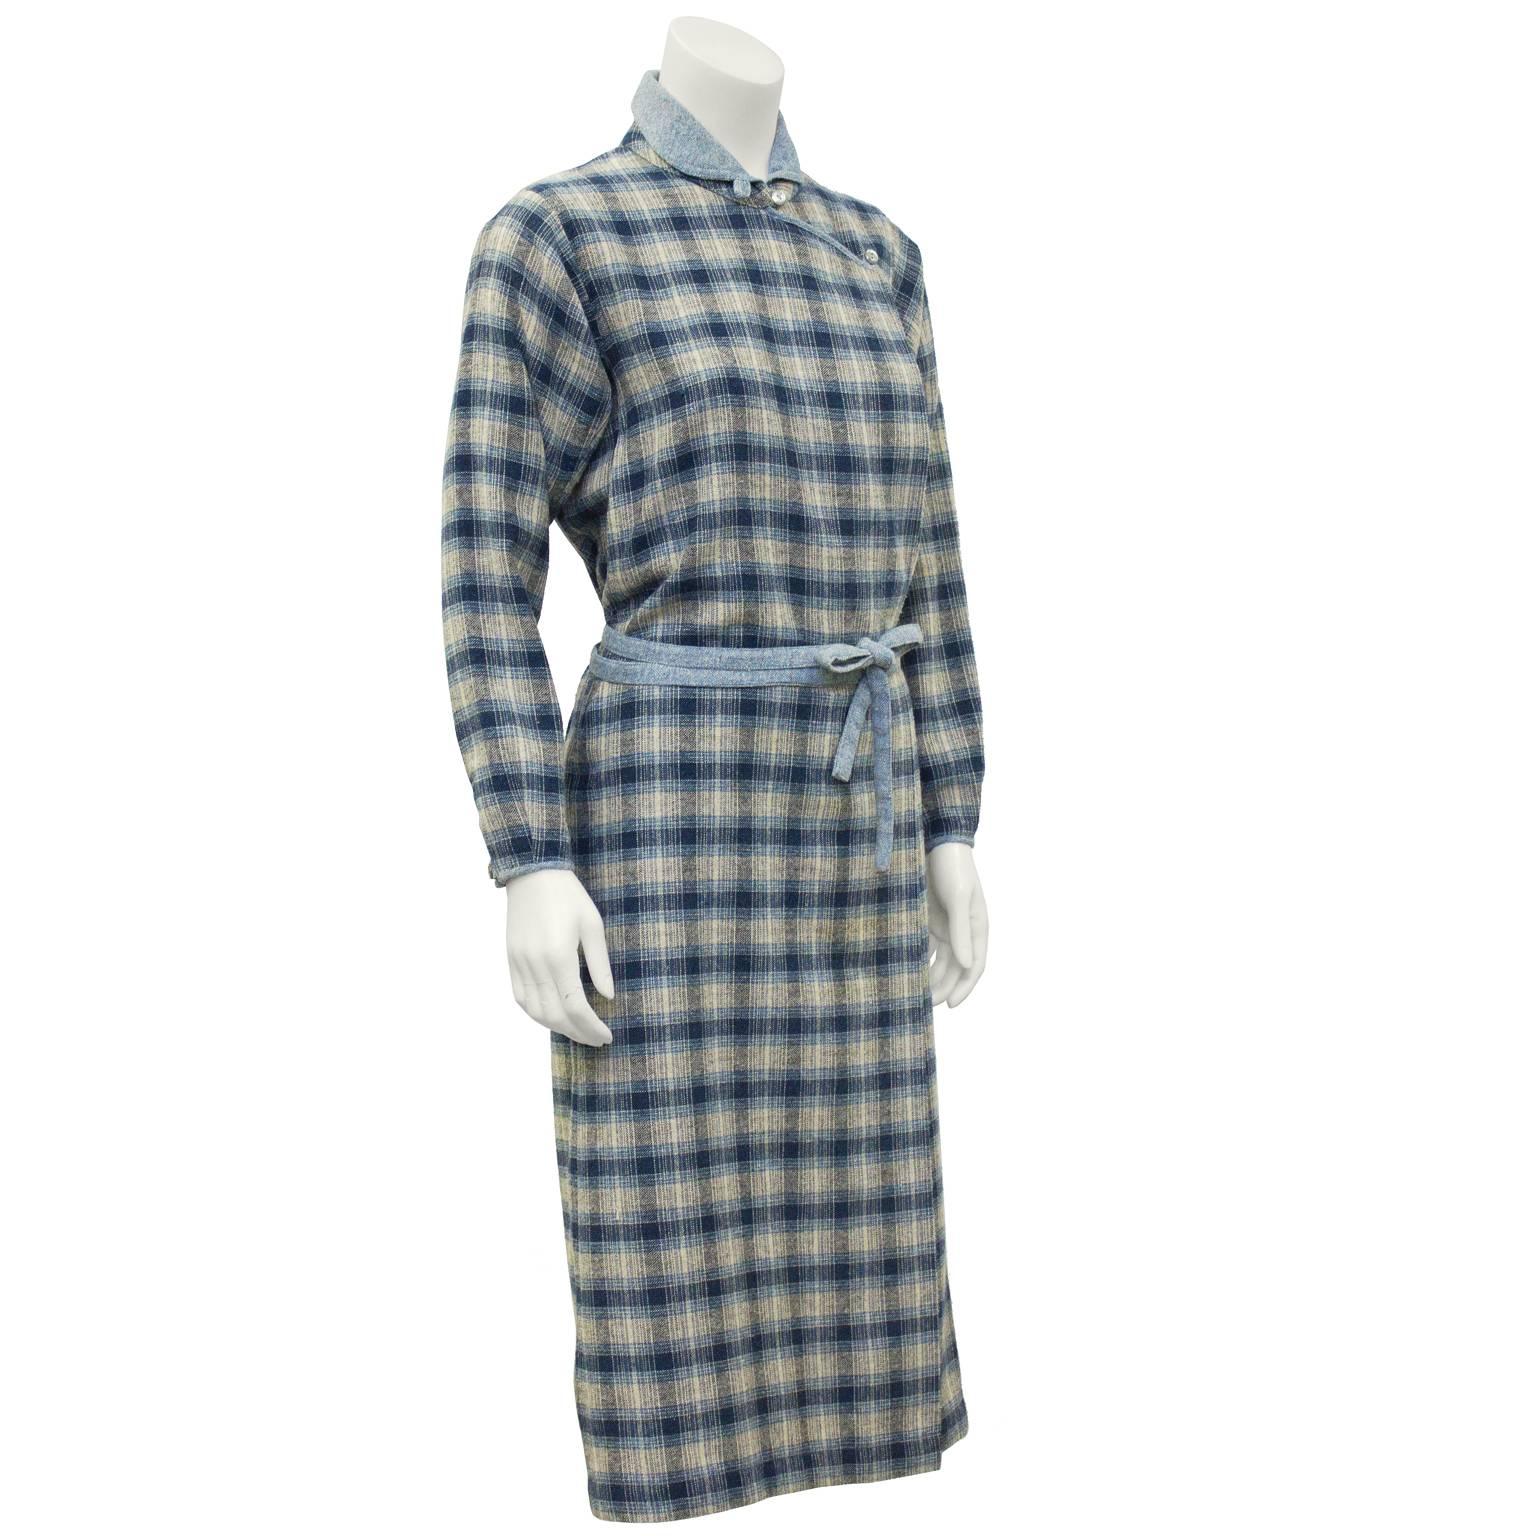 1973 Kenzo Jap Collection  denim blue and grey plaid mid calf dress with tiny mandarin collar and diagonal buttons in the Asian style referred to as Cheongsam. Narrow attached belt can be tied to the front or back. In excellent condition. Fits like